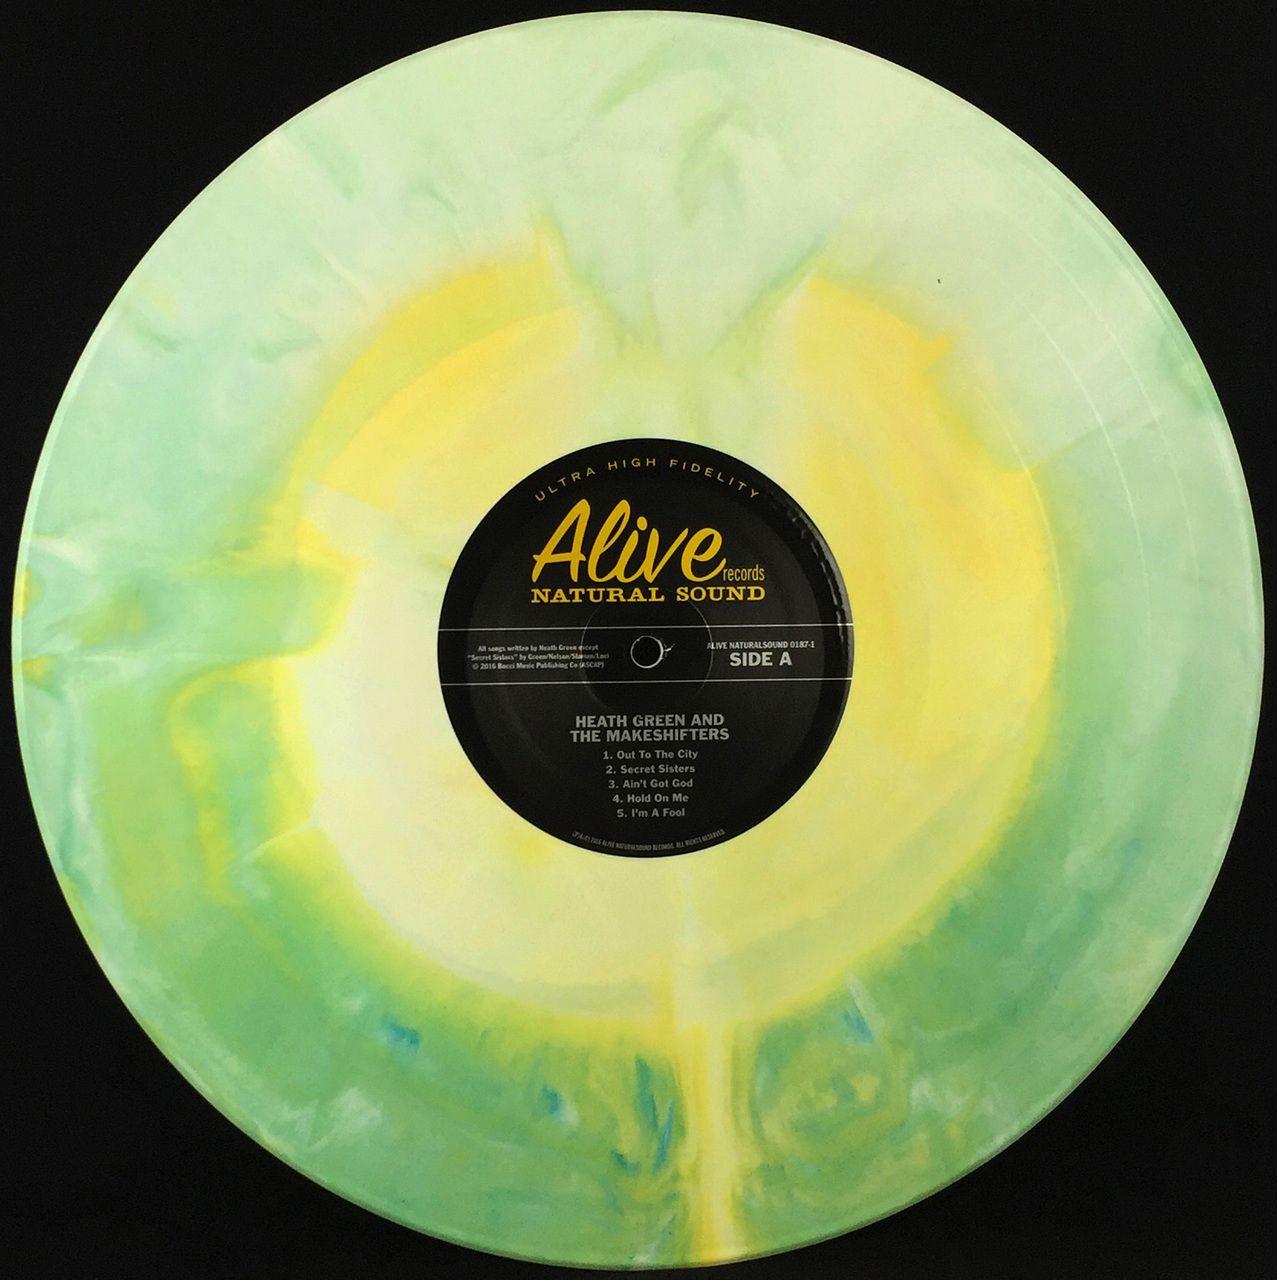 Green and Yellow Starburst Logo - HEATH GREEN AND THE MAKESHIFTERS -ST -STARBURST VINYL LP